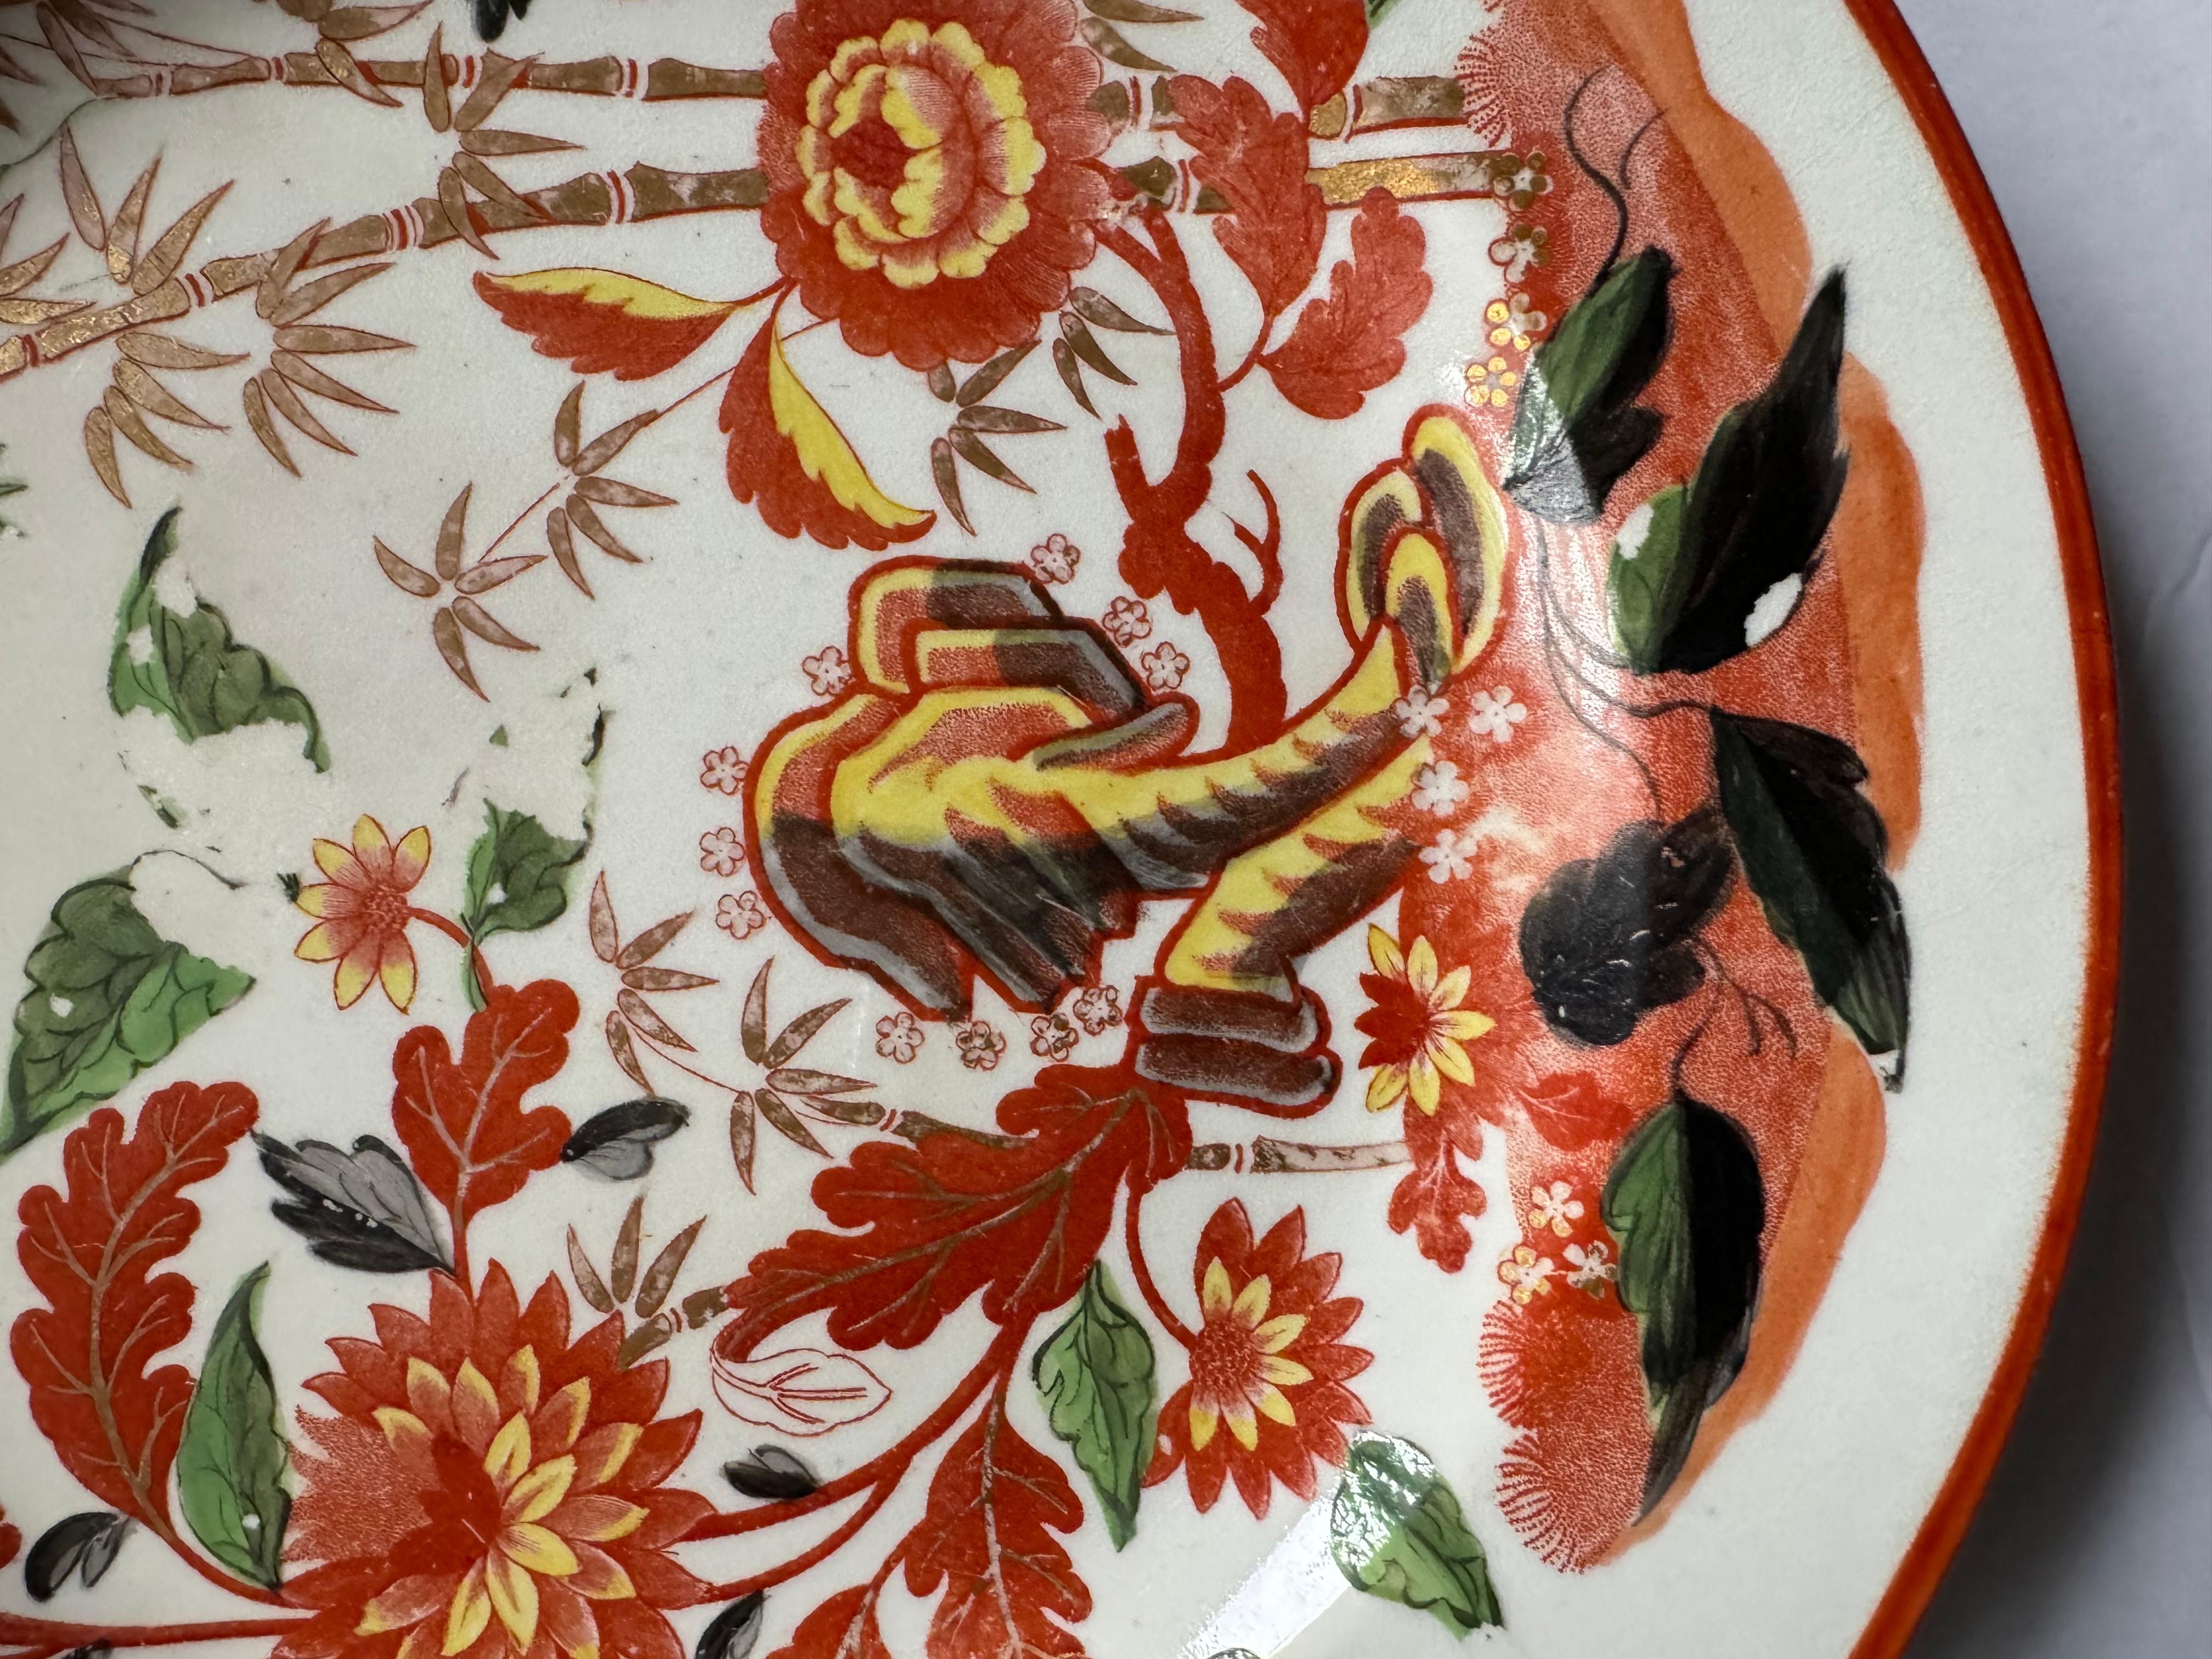 A set of four (4) early Minton porcelain plates, unusually decorated with a red bat-print of Oriental flowers and bamboo branches, overpainted with colorful enamels and complemented by a gilt rim.

Made in England, circa 1806.

Light wear; minor